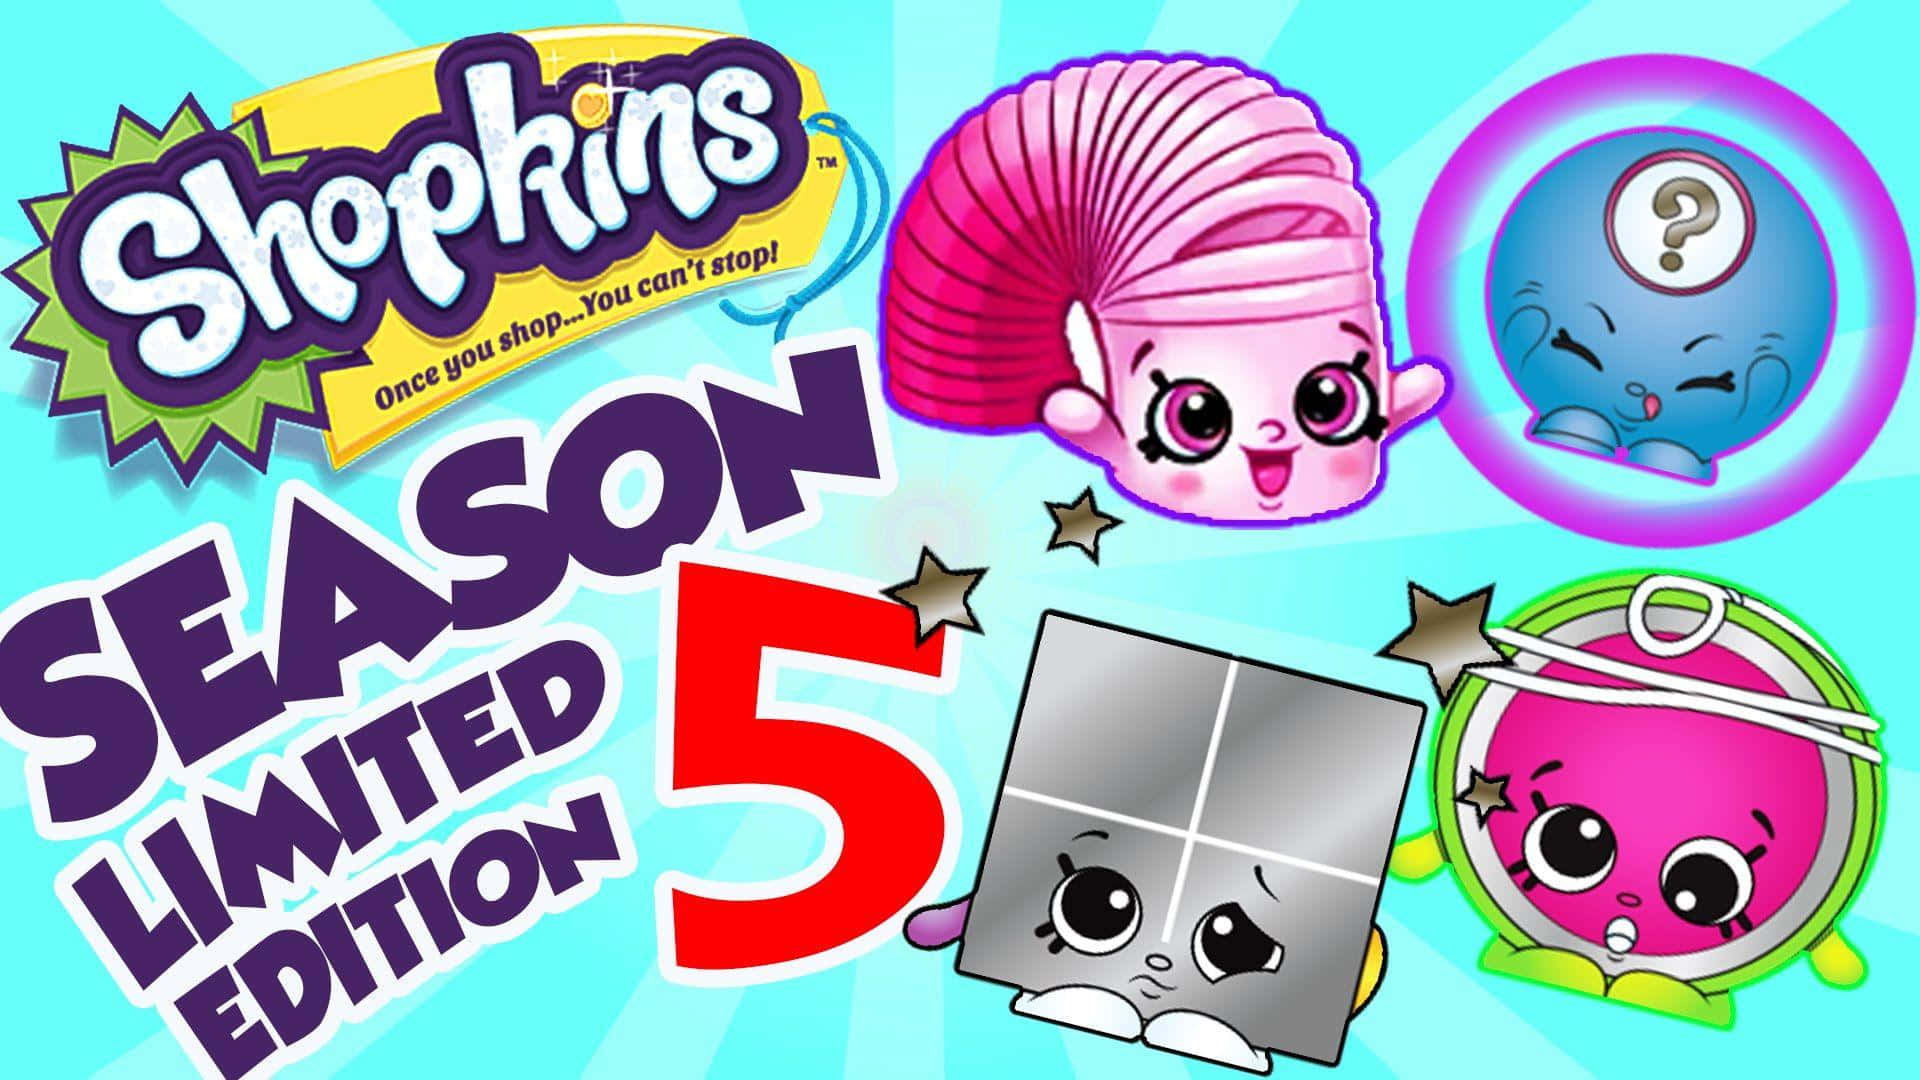 Shopkins Season 5 Limited Edition Poster Background